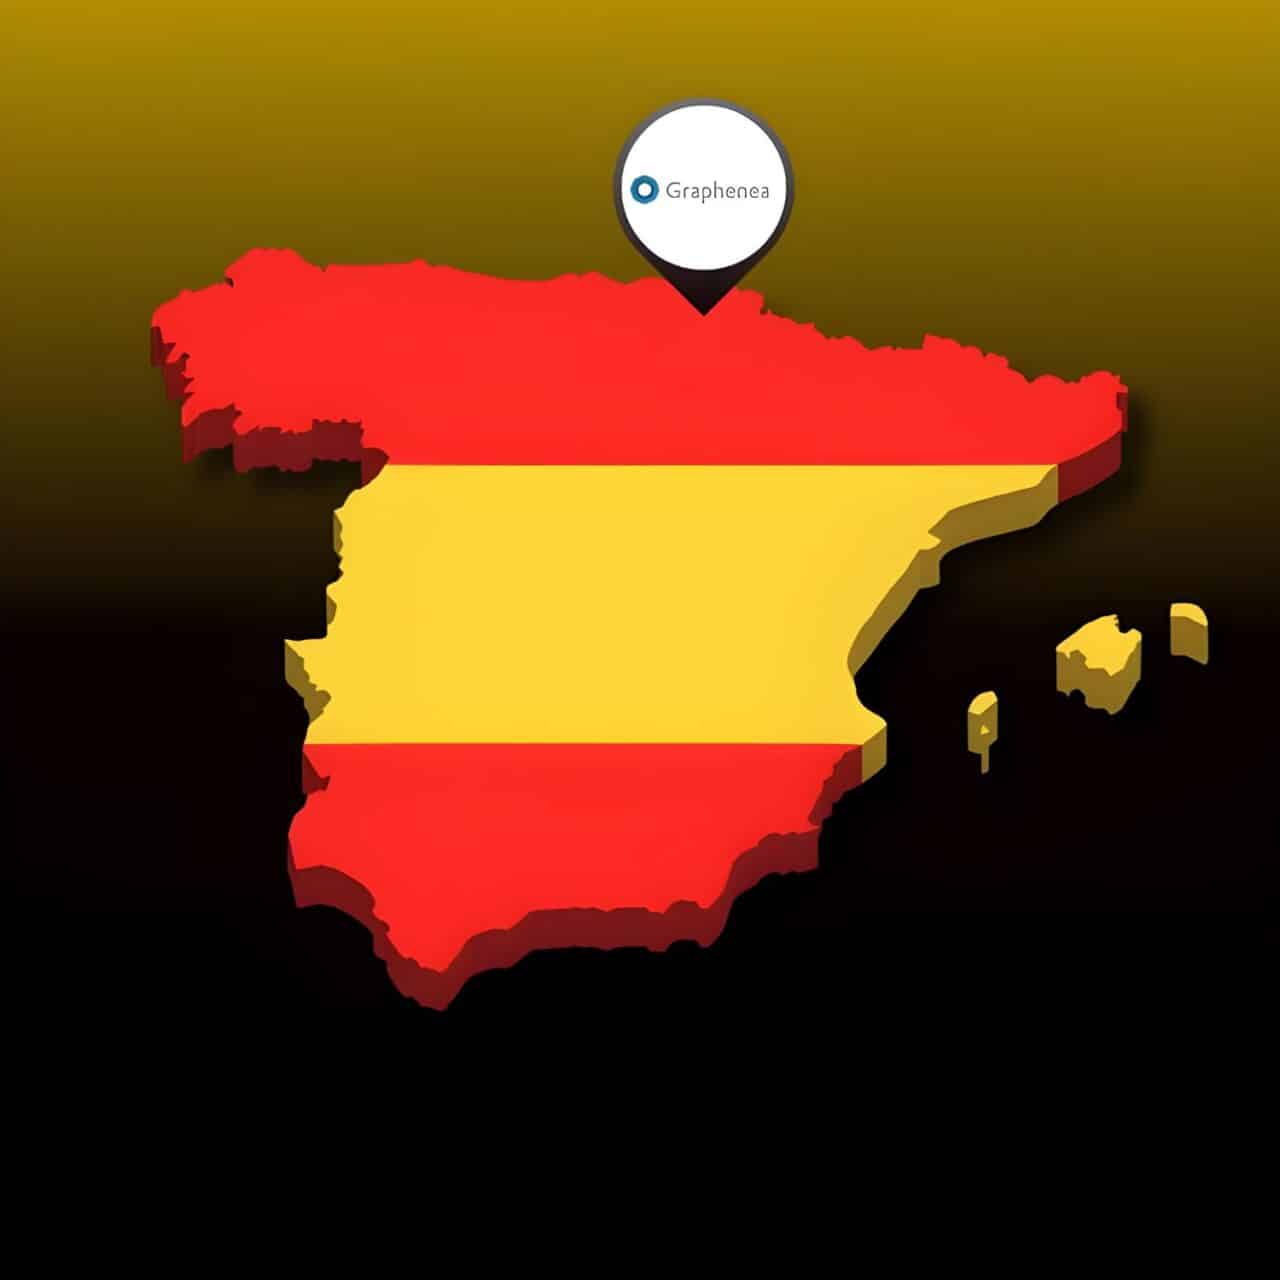 a map of Spain on a yellow & black background with a Graphenea logo presenting company's geo location